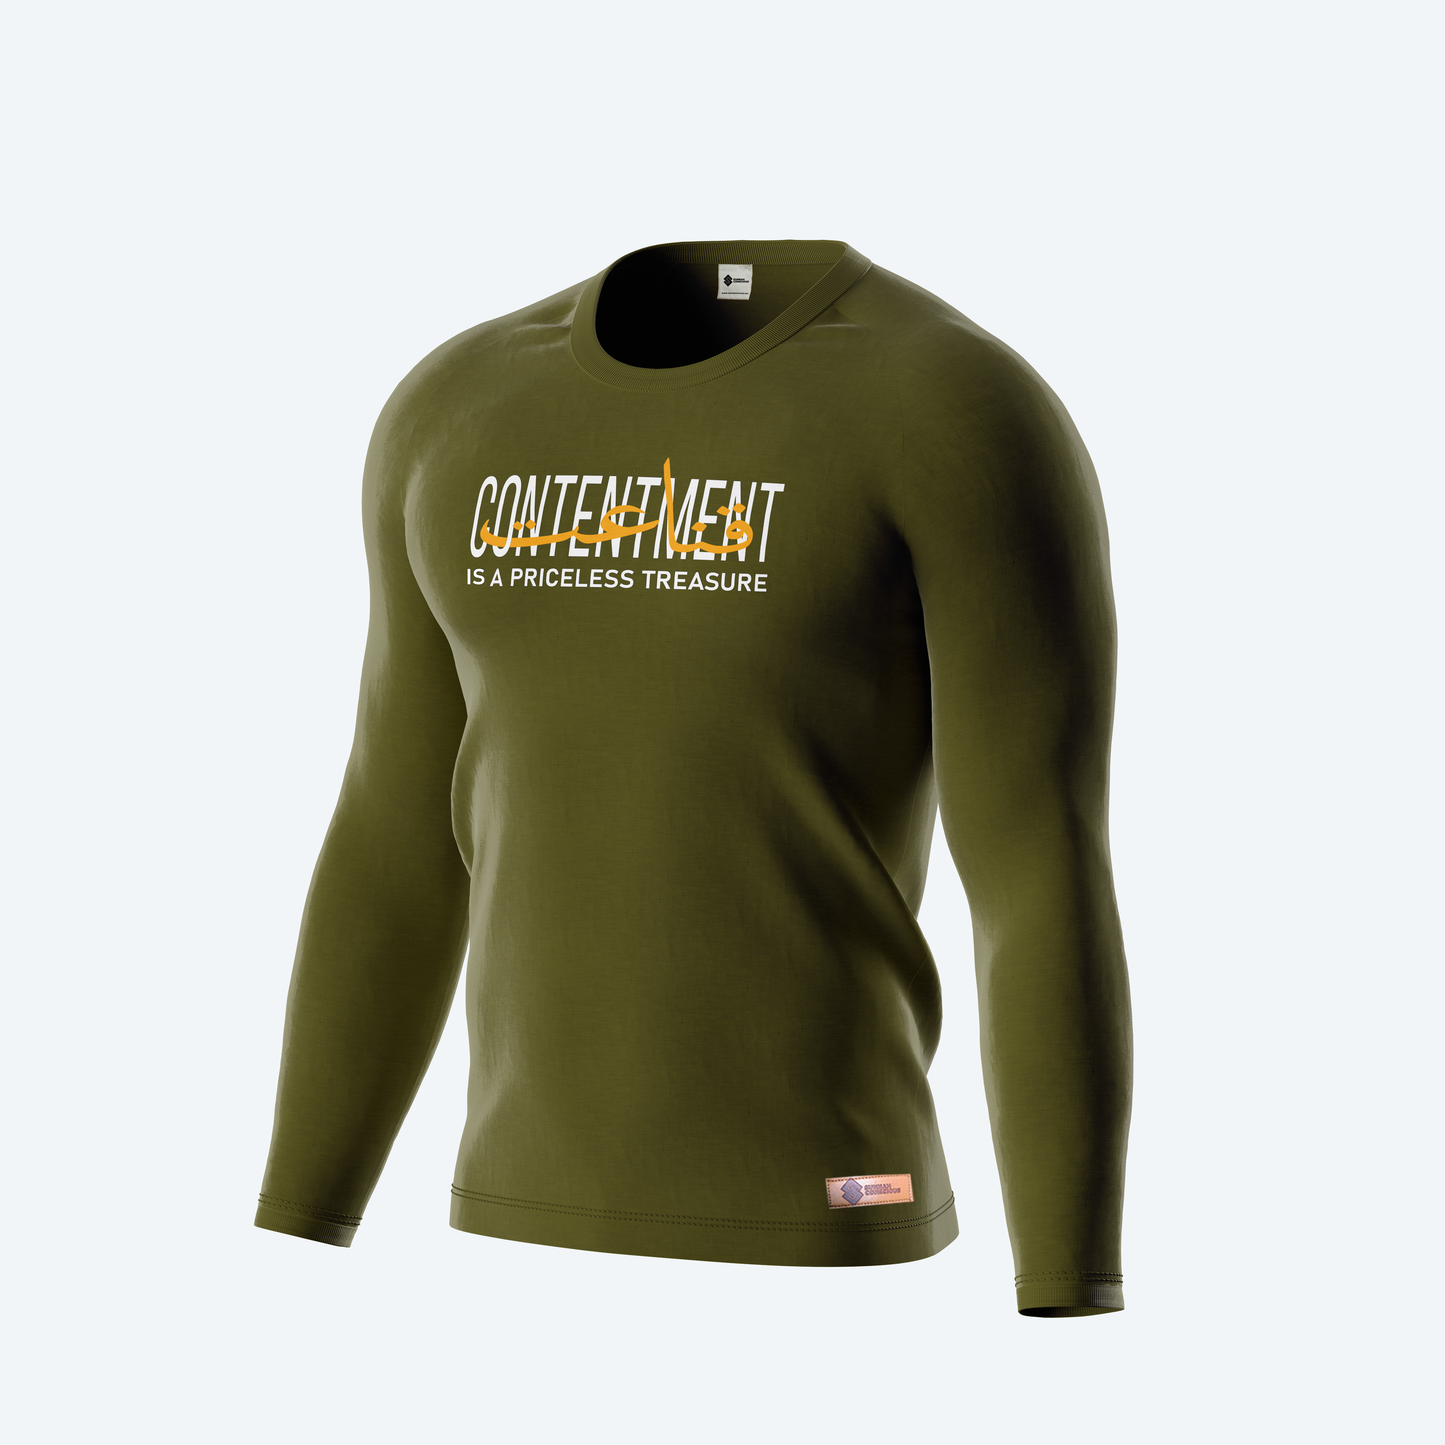 Contentment is a priceless treasure Full Sleeves Shirt